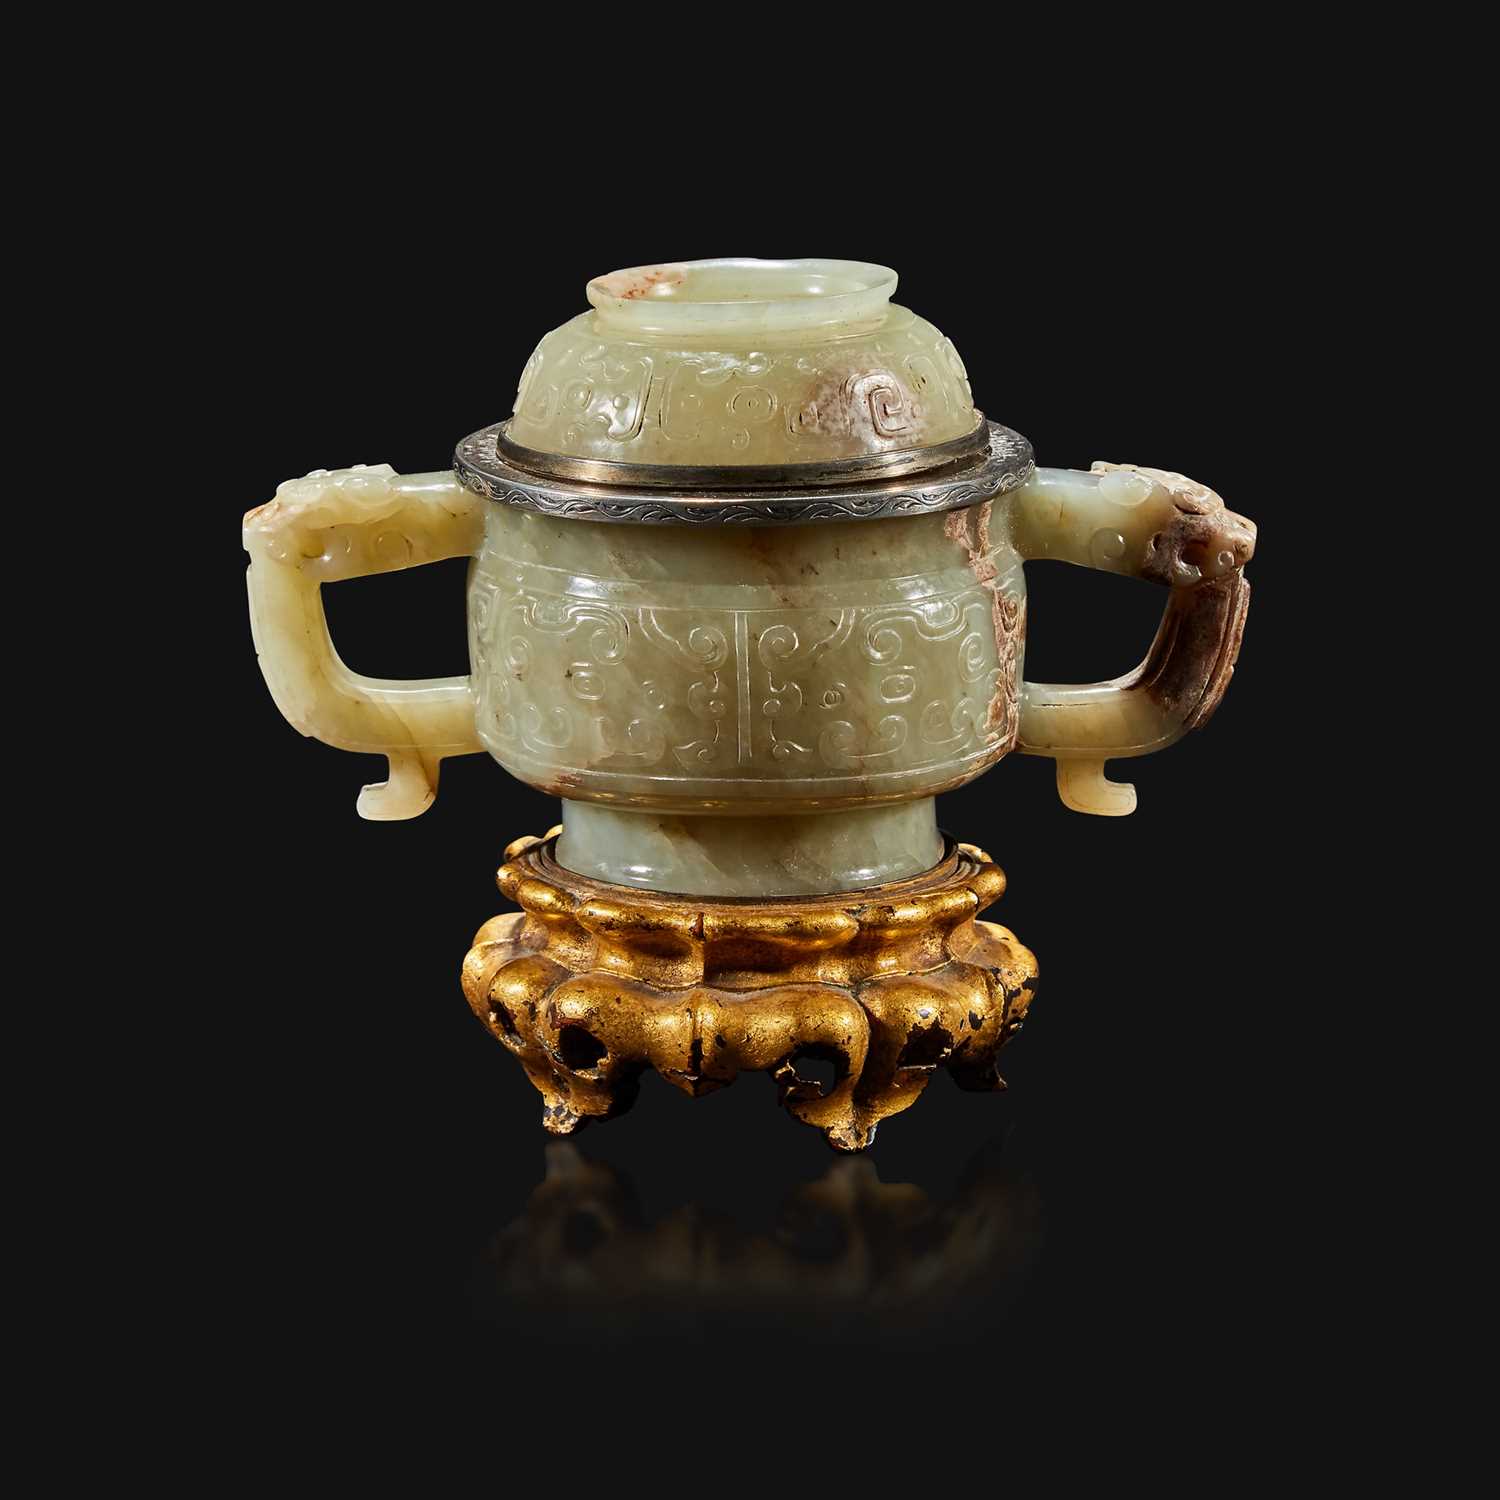 Lot 102 - A Chinese pale celadon and brown jade censer and cover, mounts by Edward I. Farmer, New York